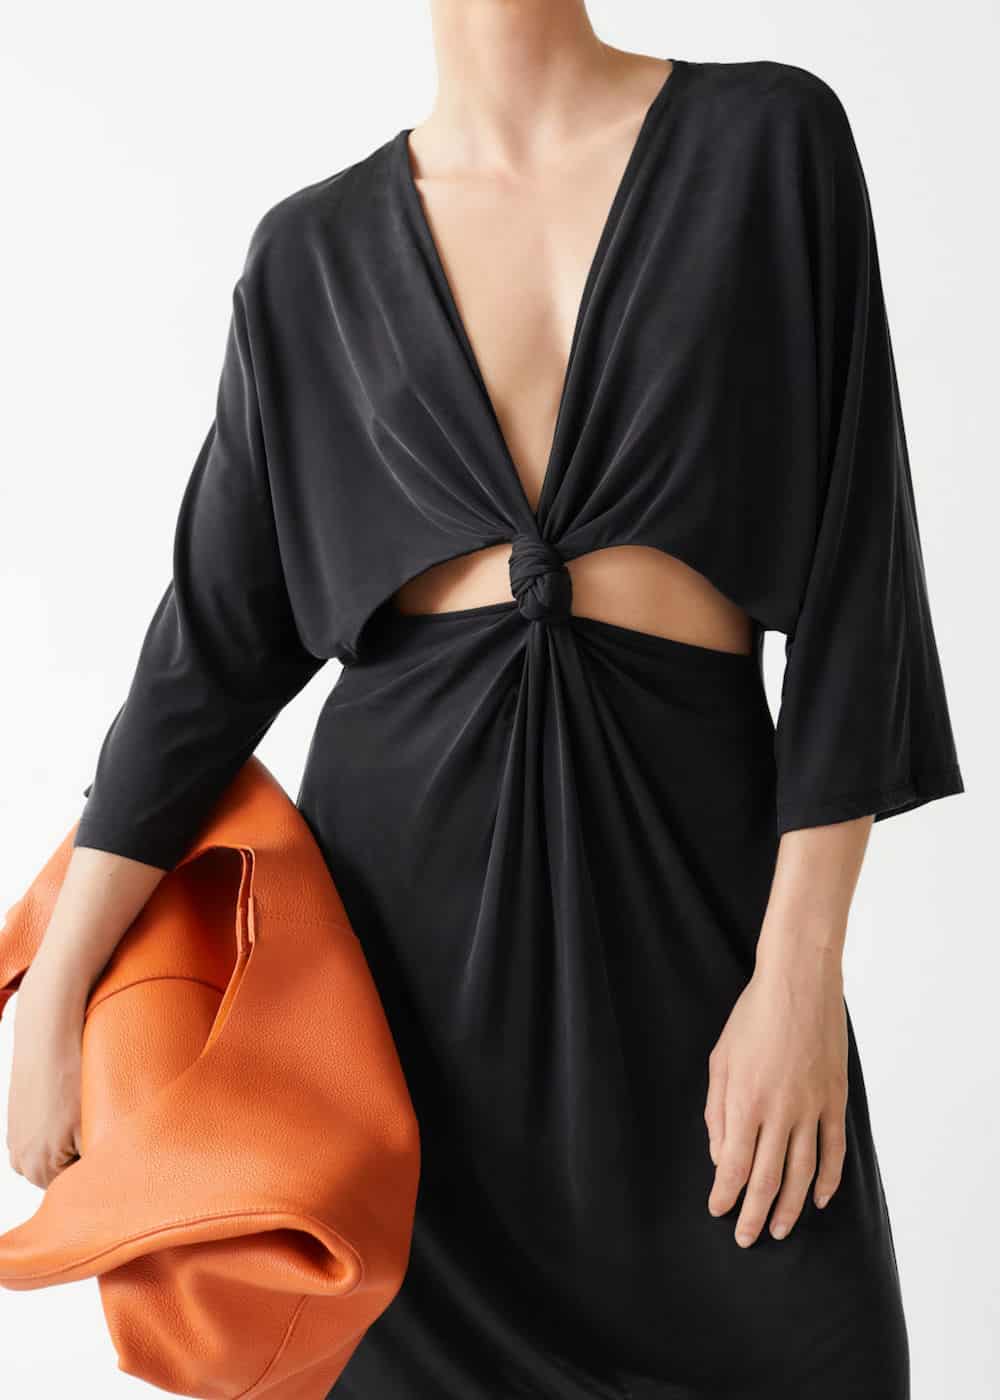 image of a woman in a black cutout dress holding an orange leather bag